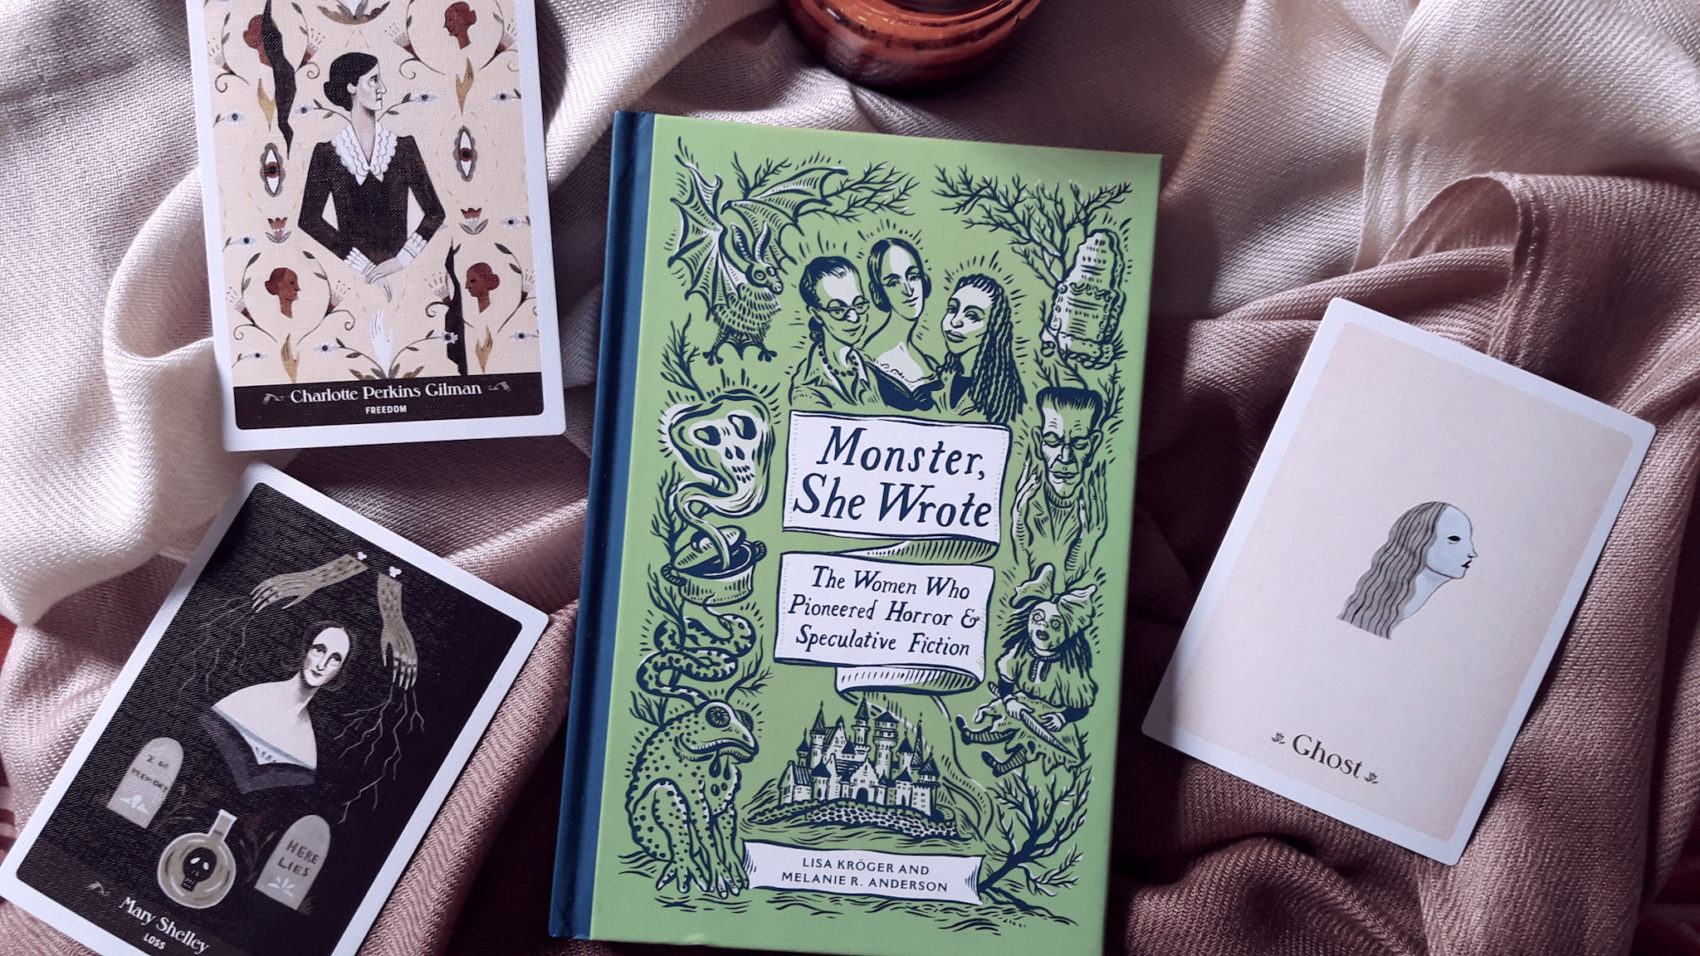 Biblioteca Wandinha Addams: Monster, She Wrote: The Women Who Pioneered Horror and Speculative Fiction